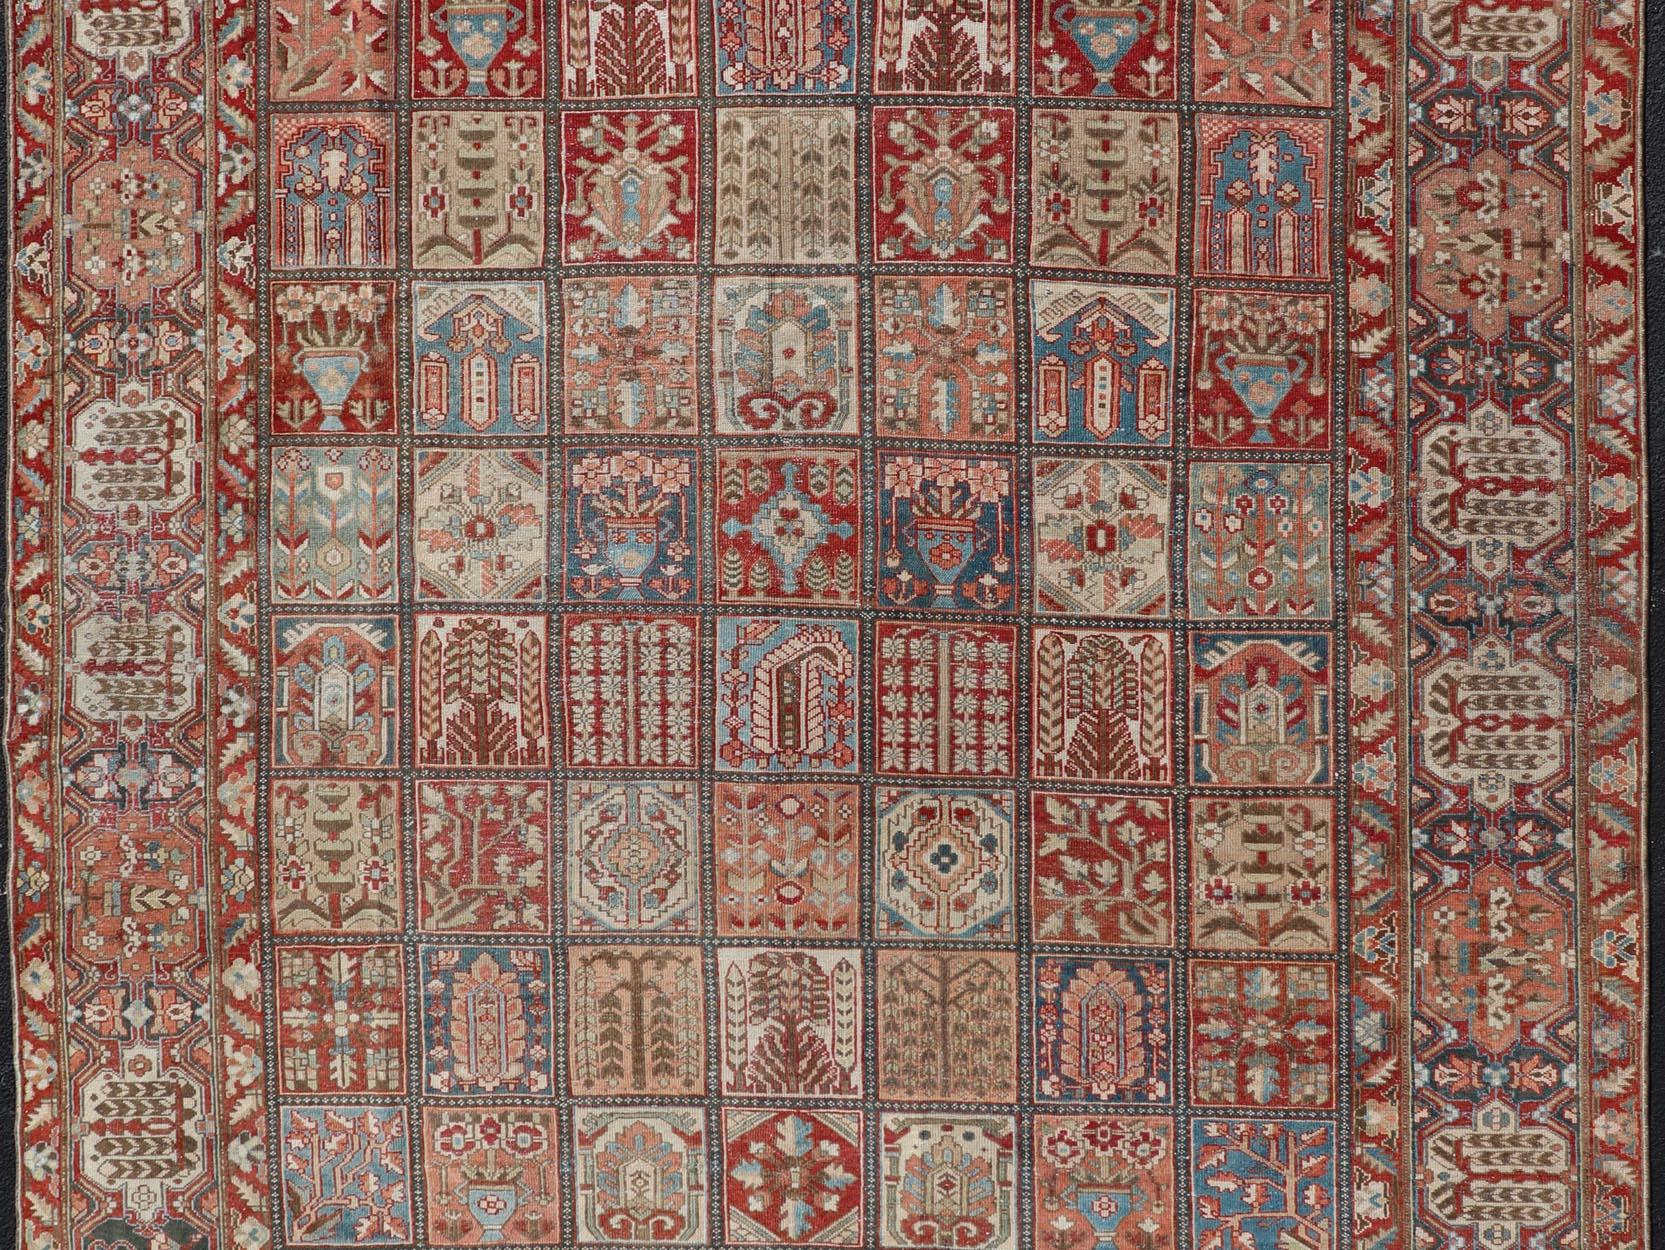 Hand-Knotted Square Persian Large Bakhtiari Rug with All-Over Garden Design in Muted Colors For Sale